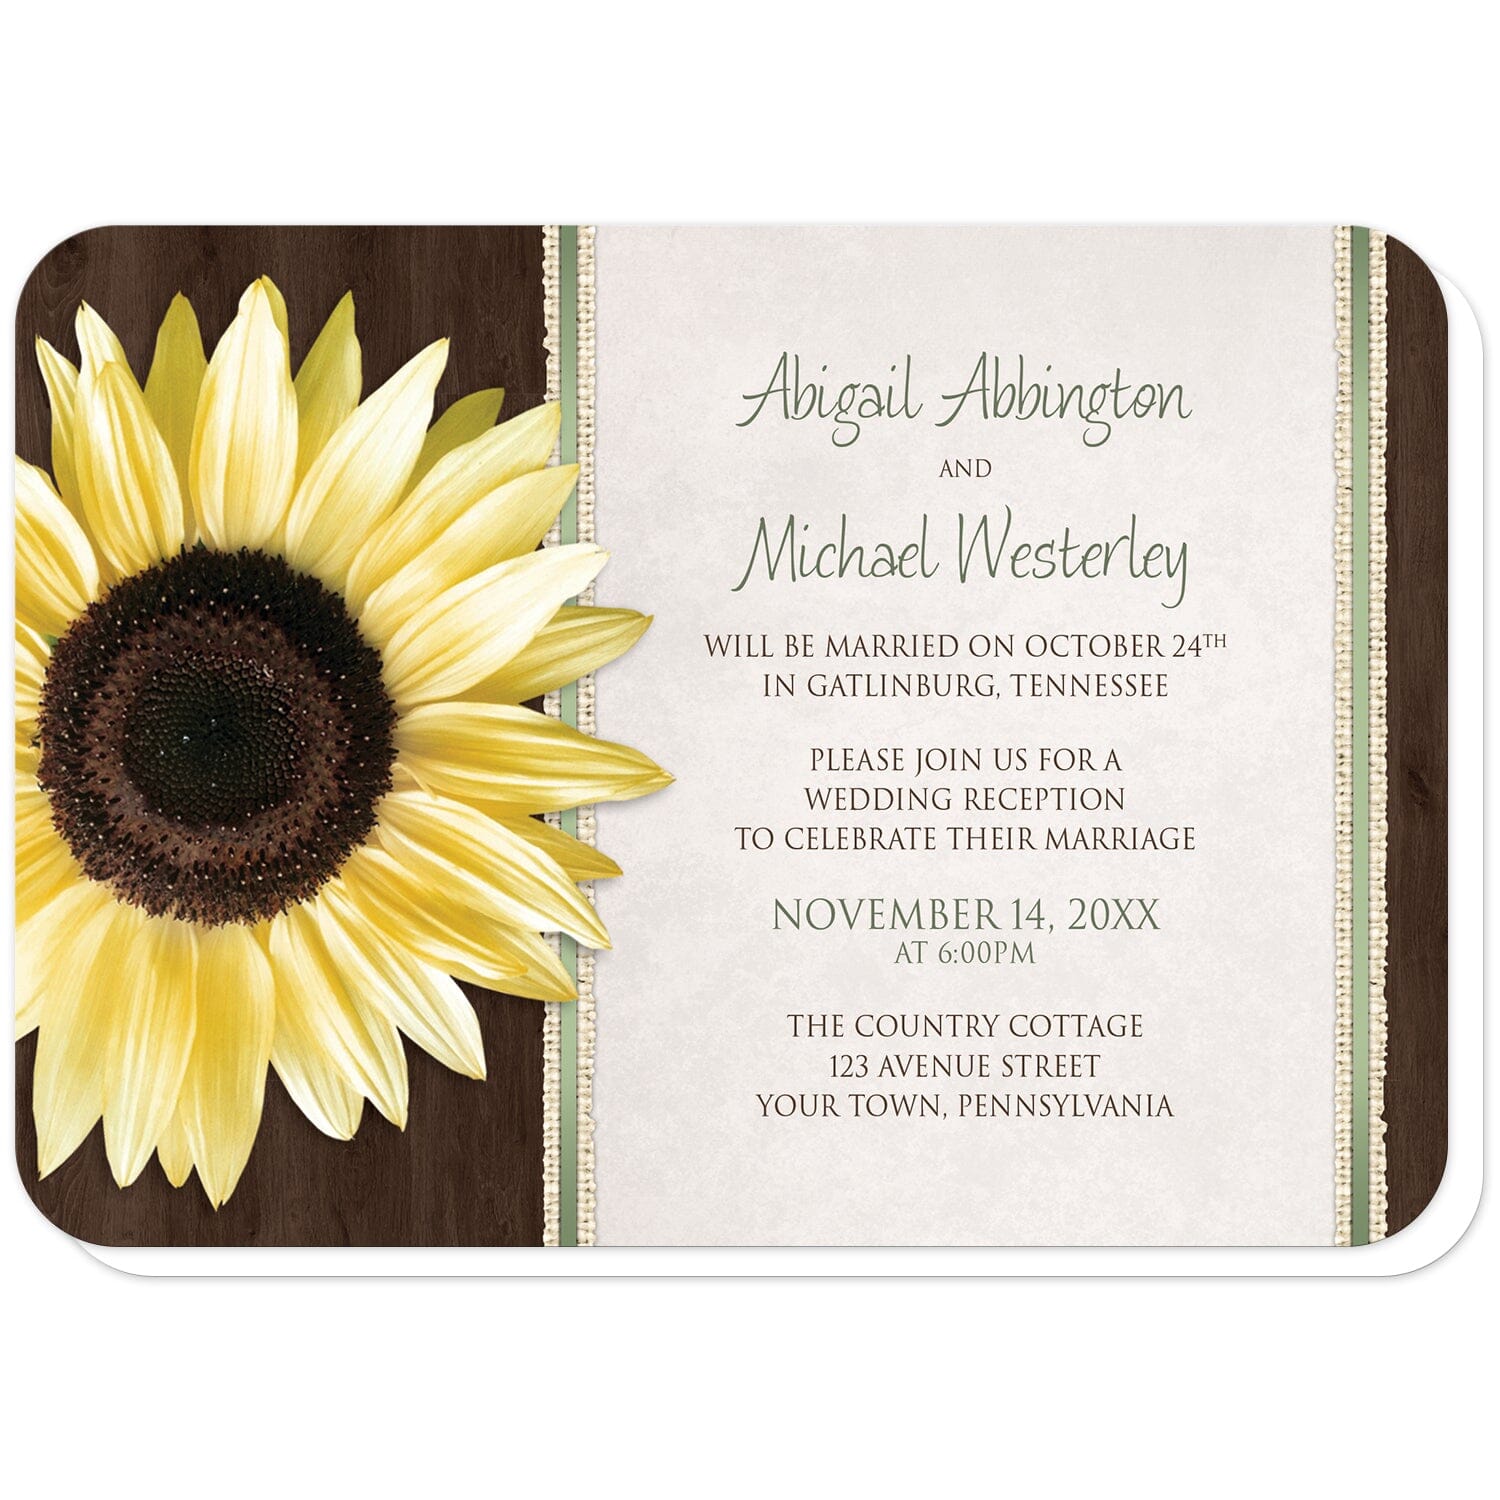 Country Sunflower Wood Brown Green Reception Only Invitations (with rounded corners) at Artistically Invited. Country sunflower wood brown green reception only invitations in a floral southern style, with a big yellow sunflower over a dark brown wood pattern illustration on the left side. Your personalized post-wedding reception celebration details are custom printed in green and brown over a beige parchment design to the right of the sunflower, outlined vertically by burlap strips and green stripes.